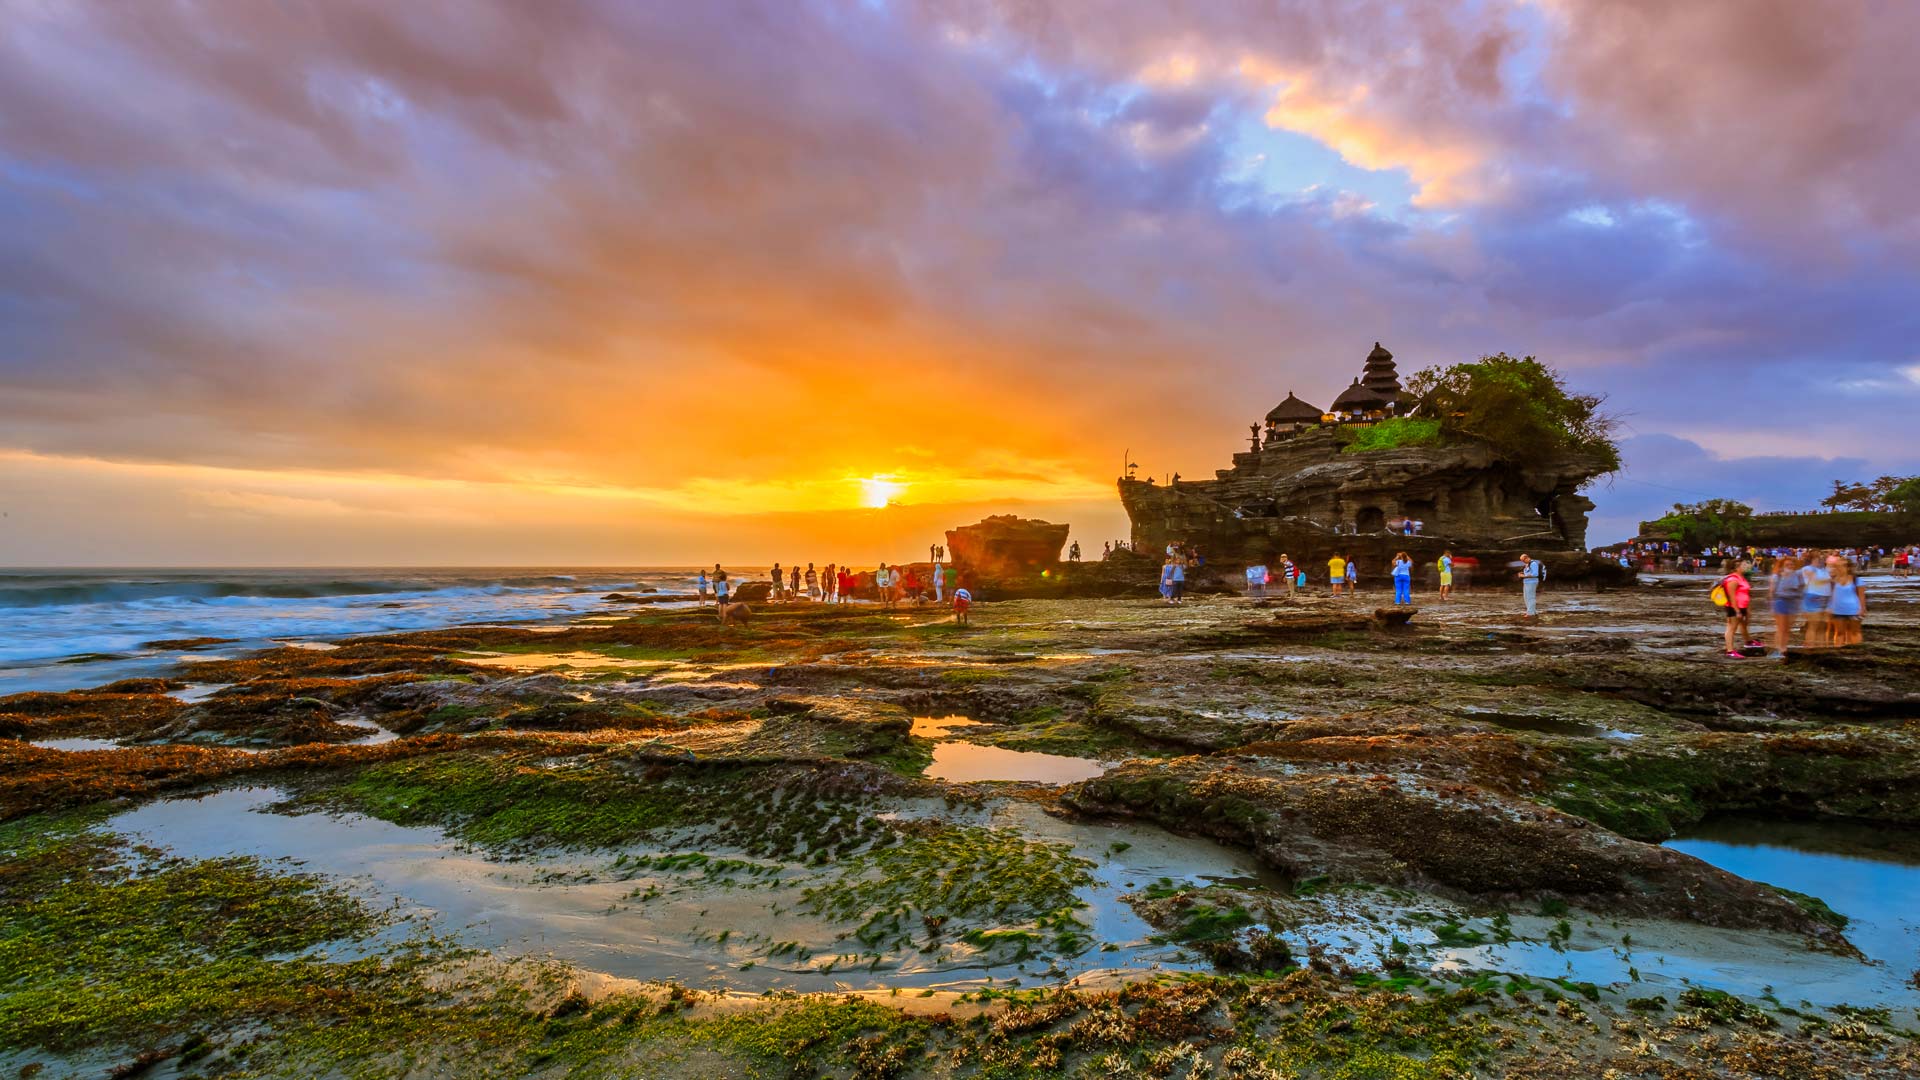 Must See Temples in Bali